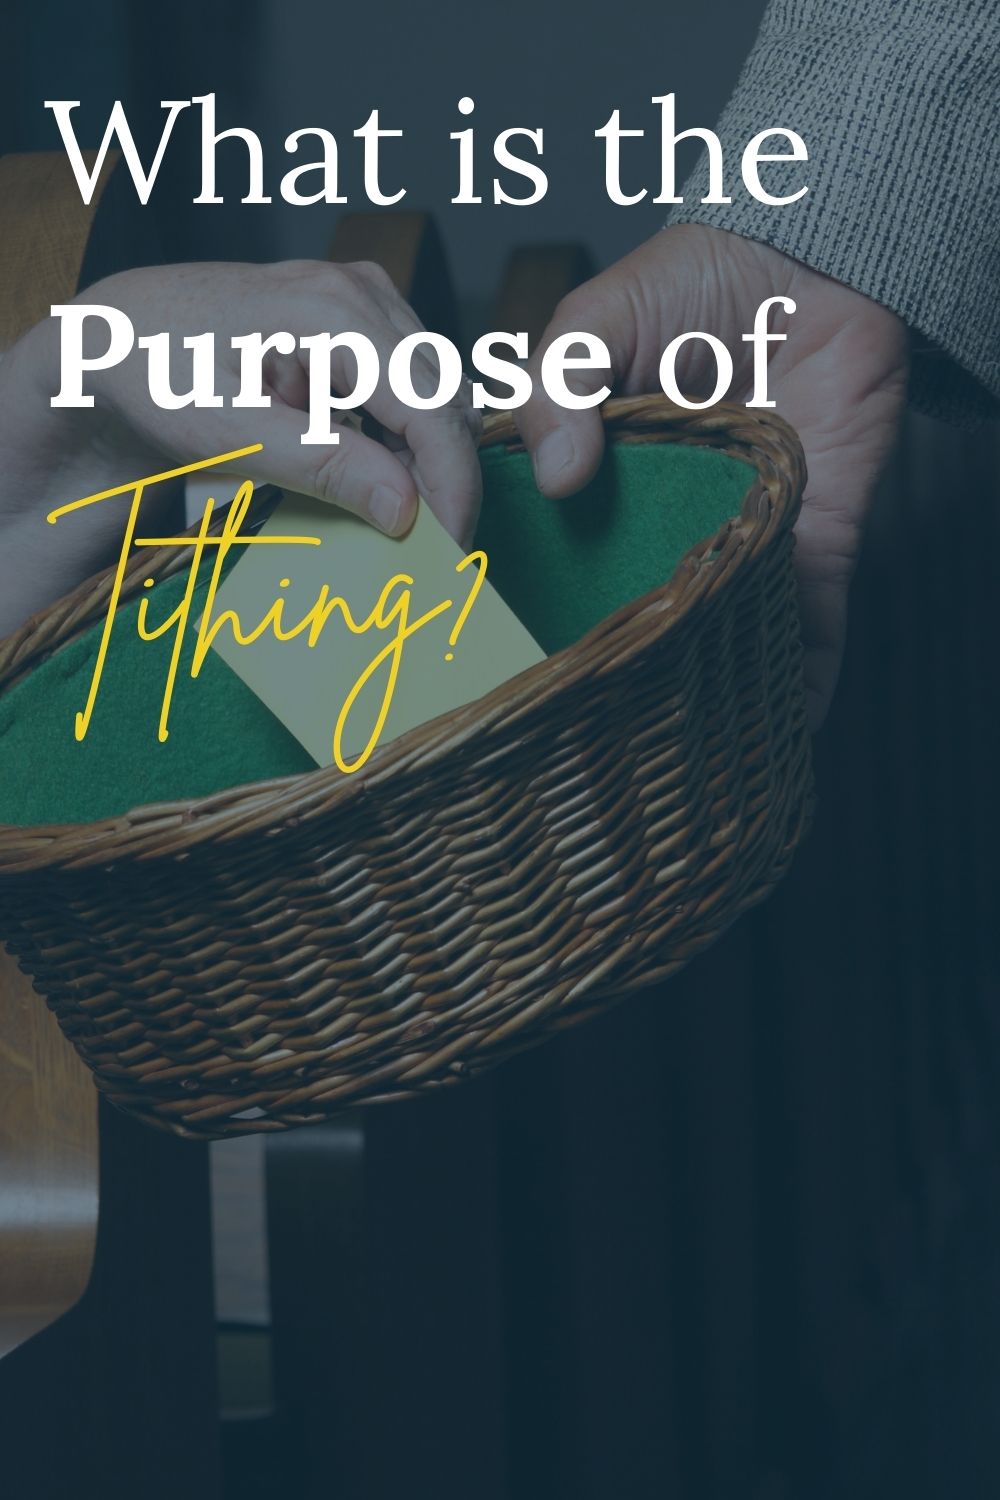 What is the purpose of tithing for modern day Christians? Is tithing still important for Christians today? And if so, how do we tithe biblically?